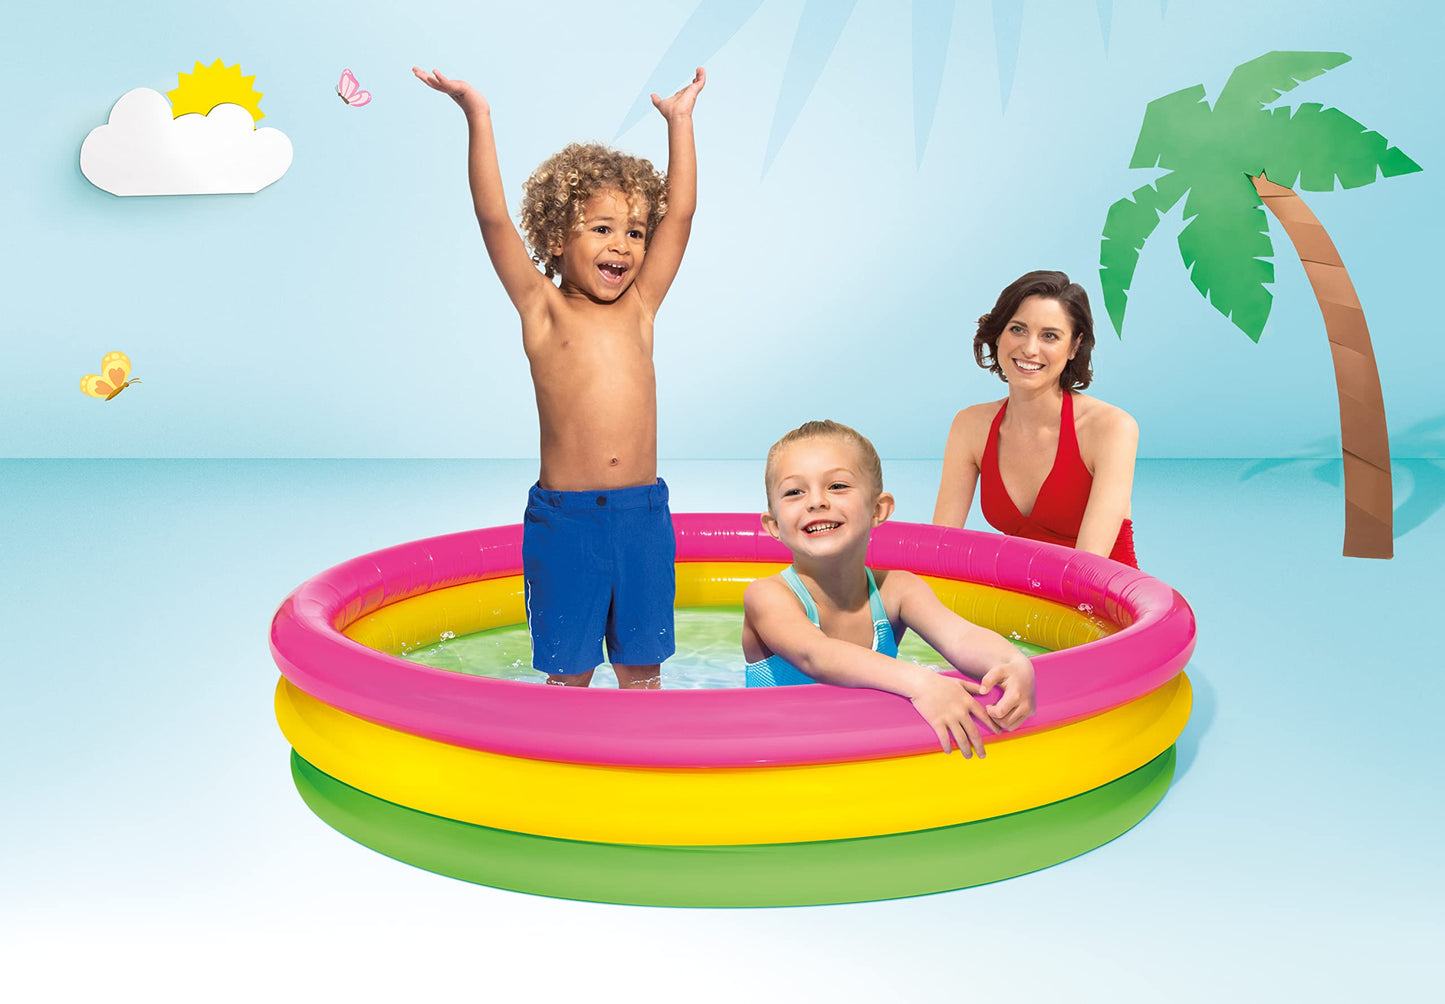 Intex Sunset Glow Inflatable Pool: 58" x 13" - 3 Ring Soft Floor